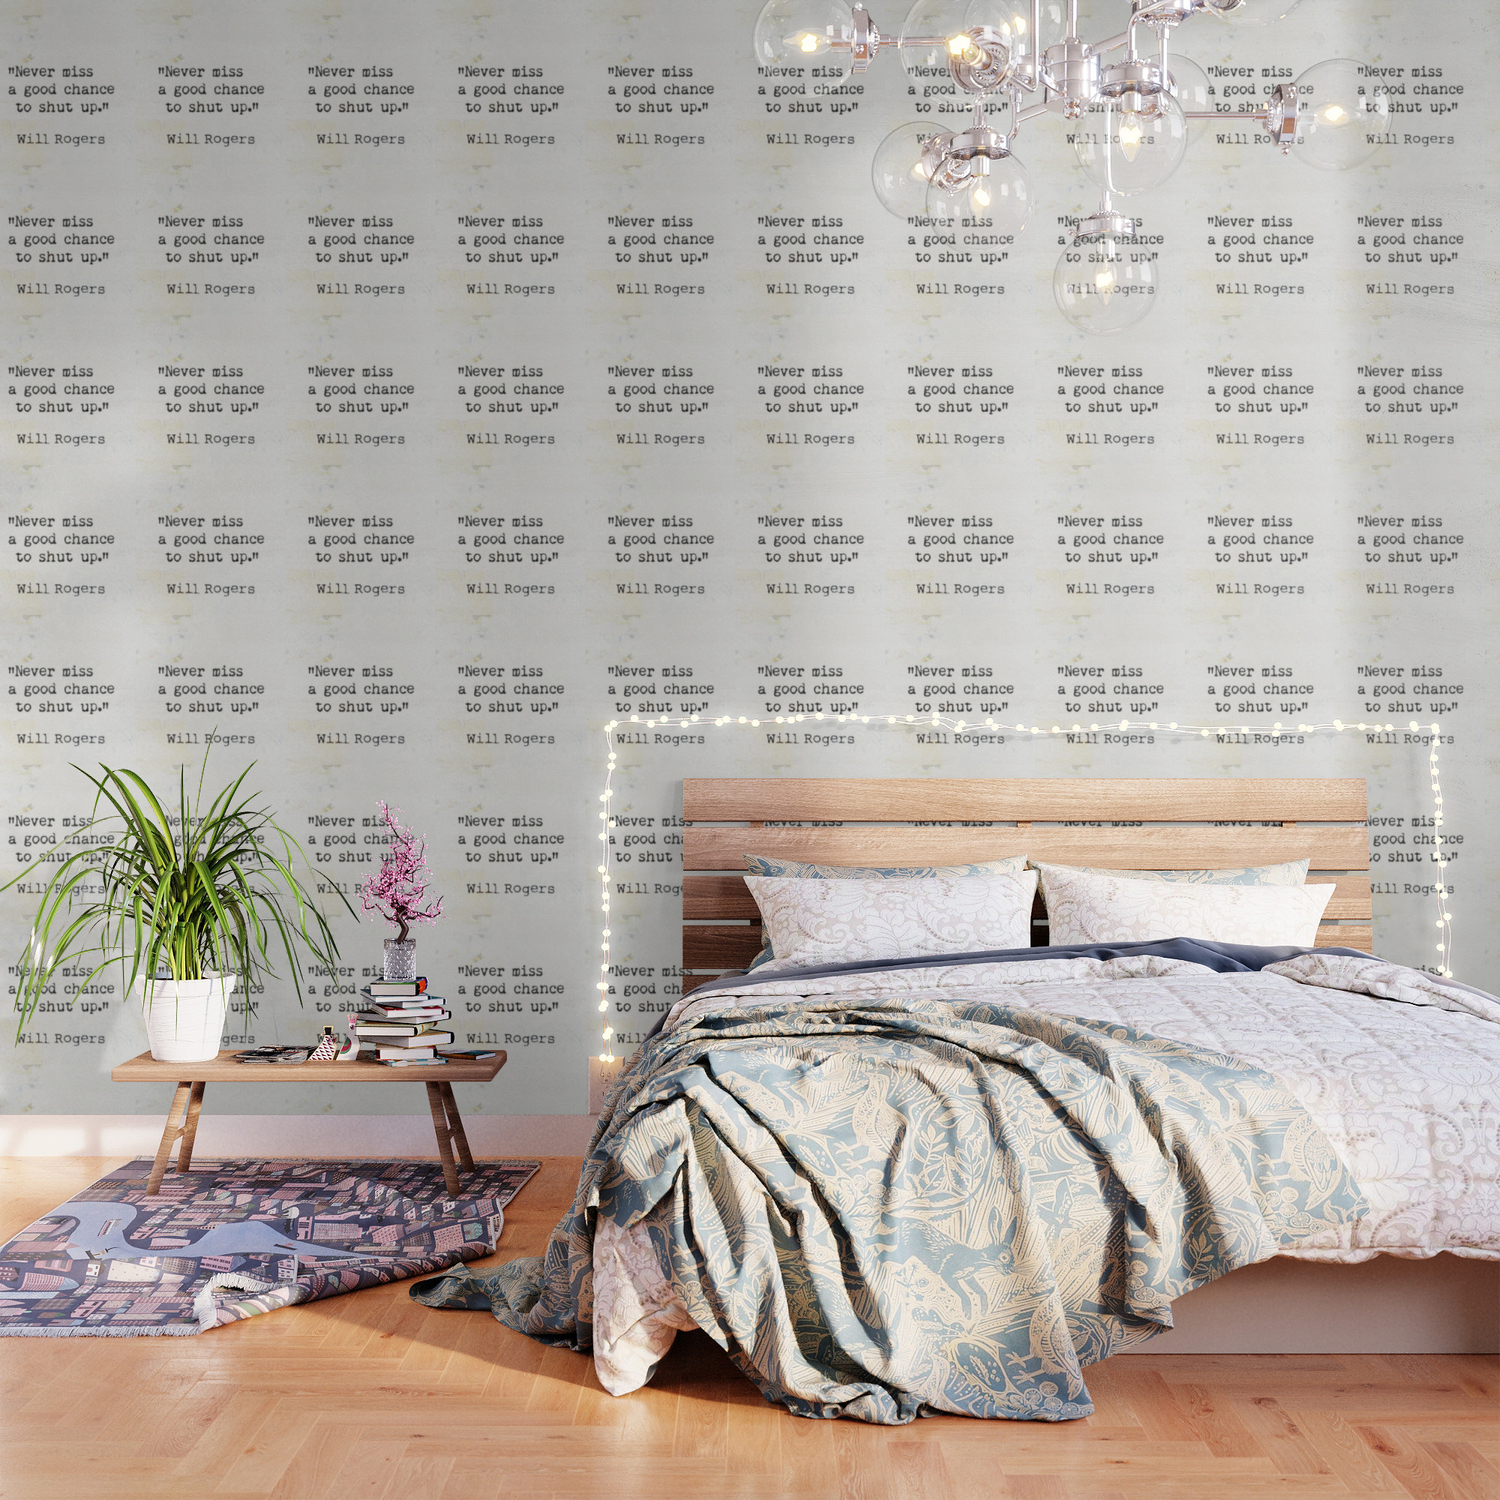 Never miss a good chance to shut up. Will Rogers quote-collage Wallpaper by  epic paper | Society6